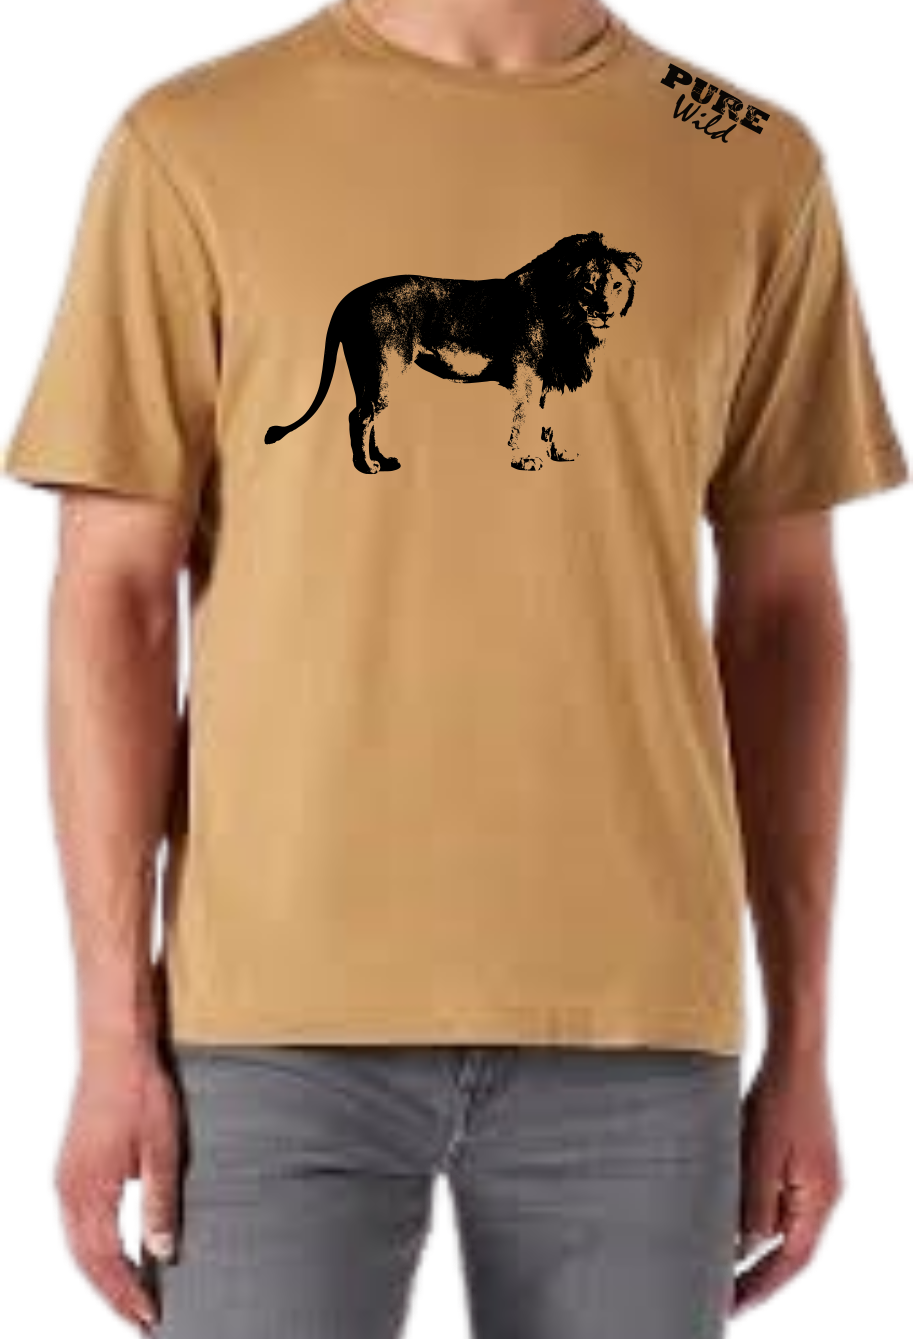 Lion T-Shirt For A Real Man